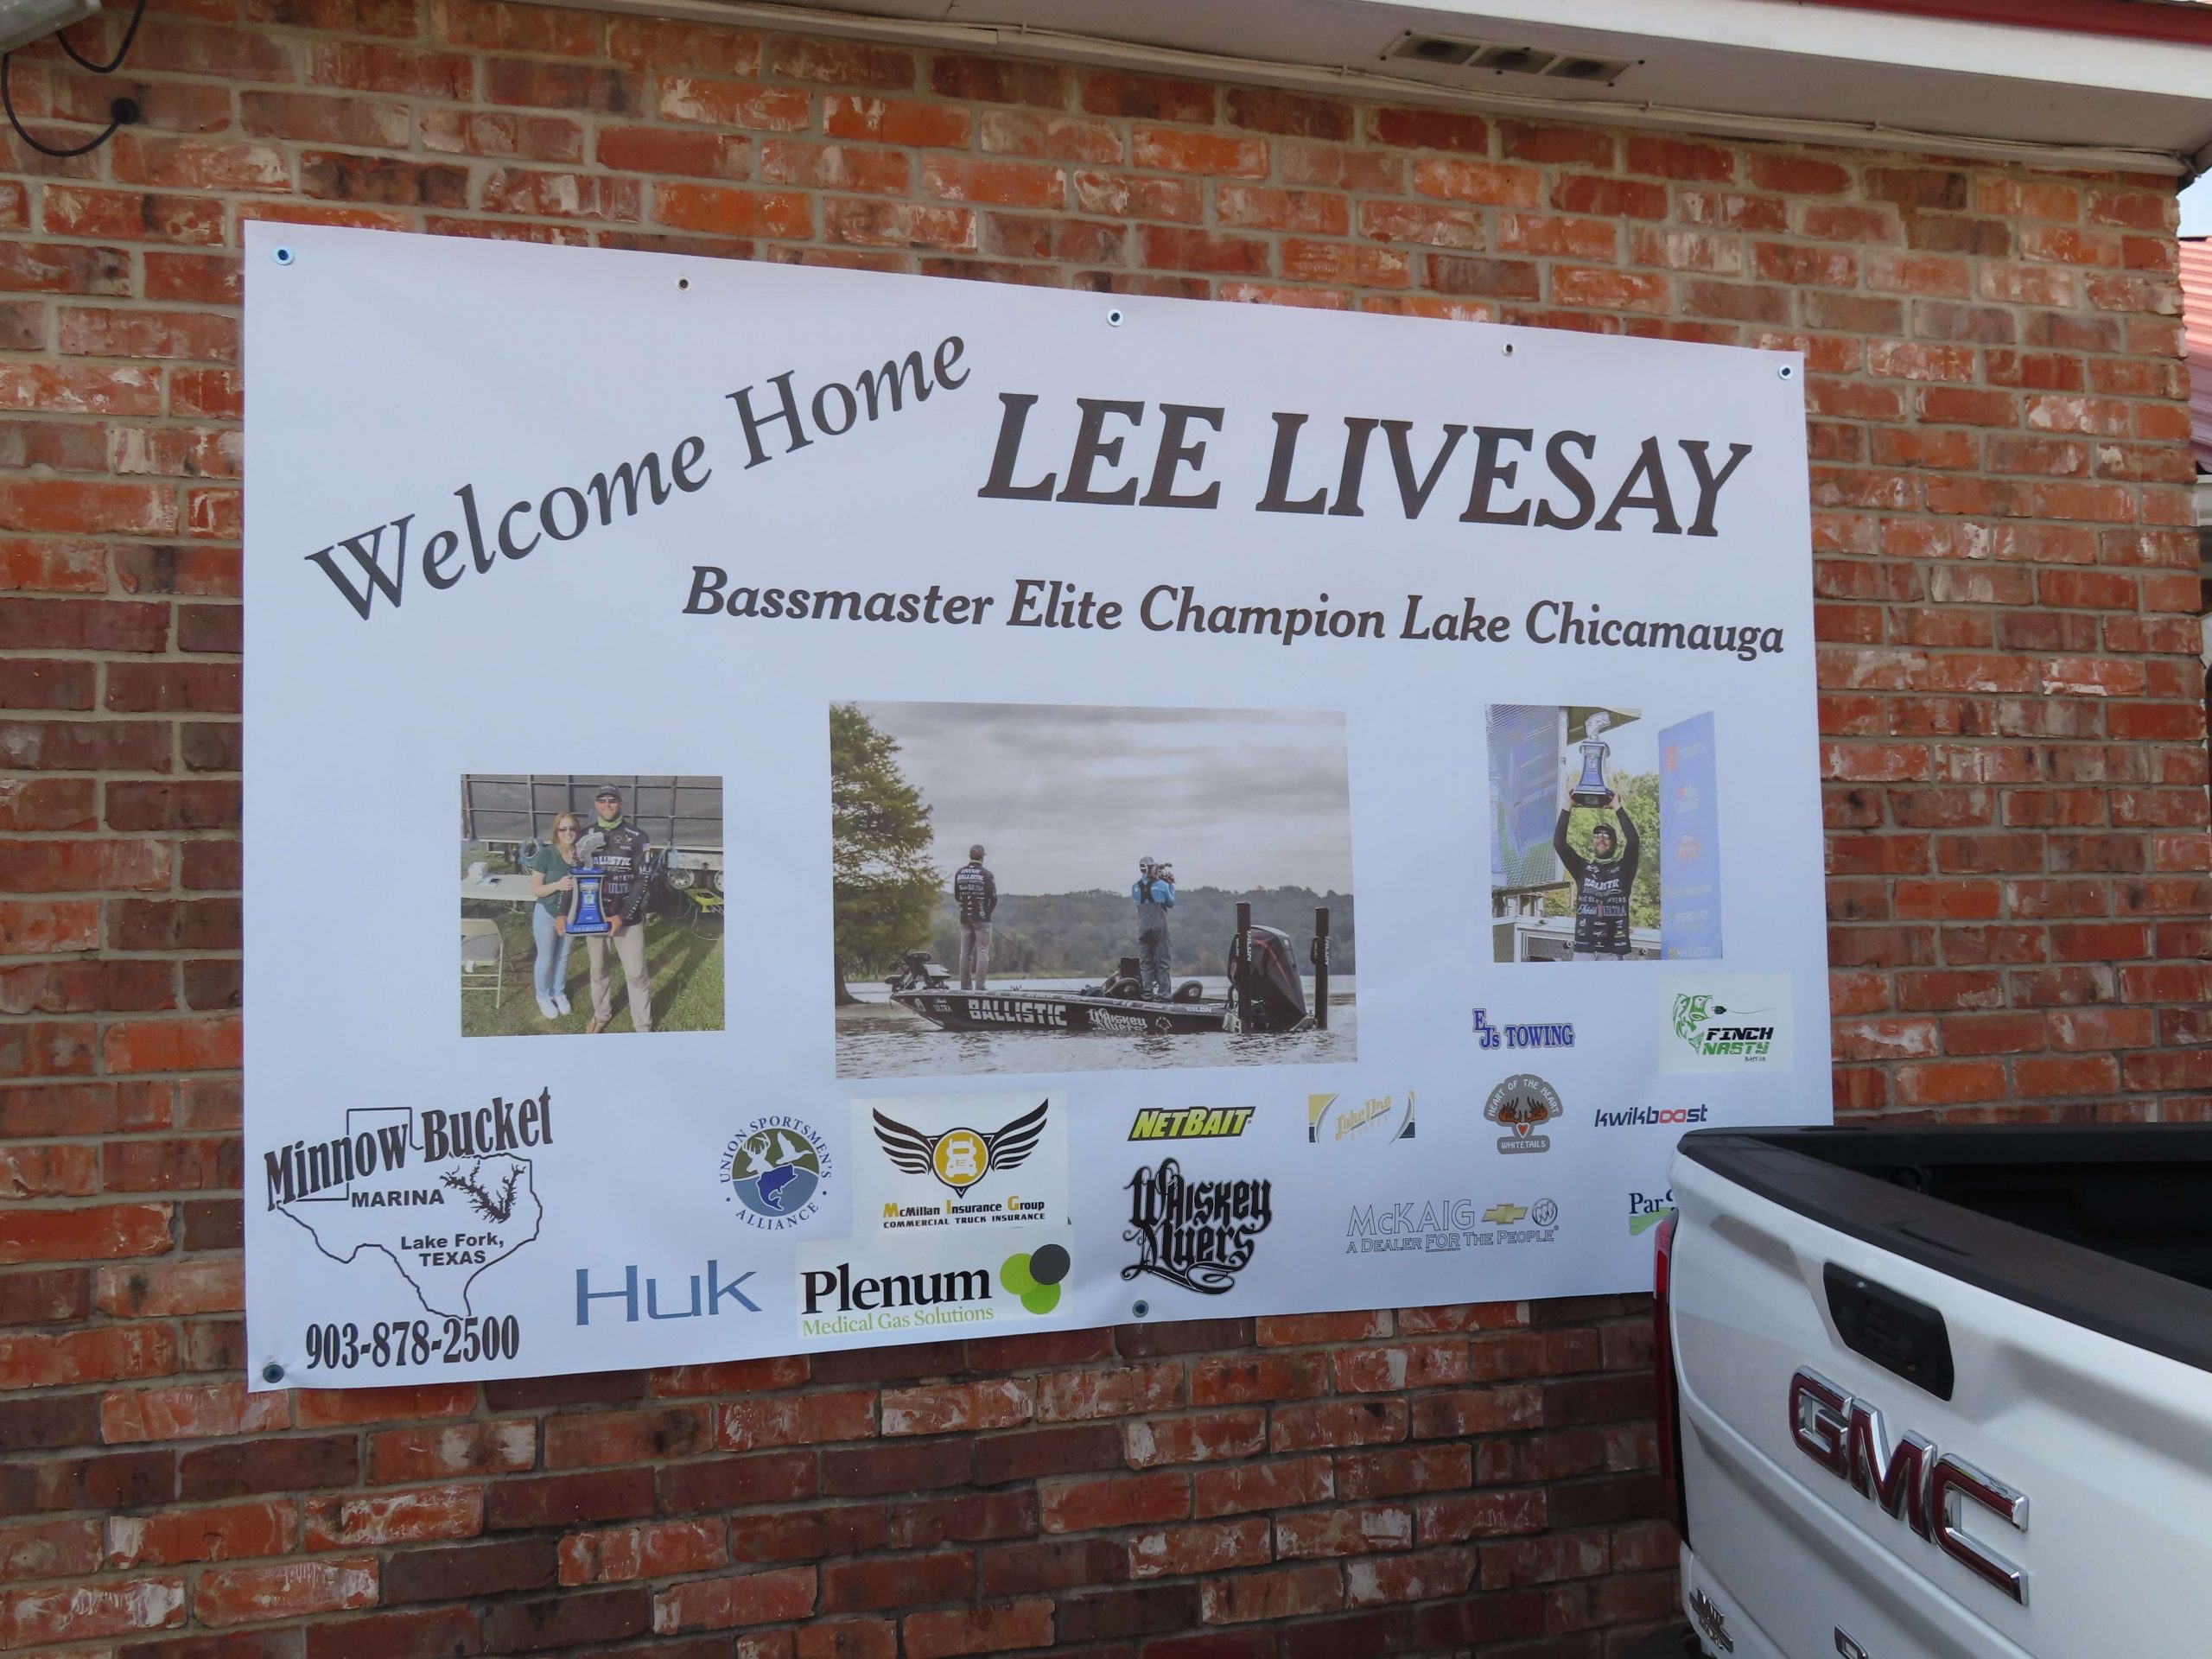 Will it be two in a row for Lee Livesay, competing on the very lake where he guides? The folks inside sure think so. 